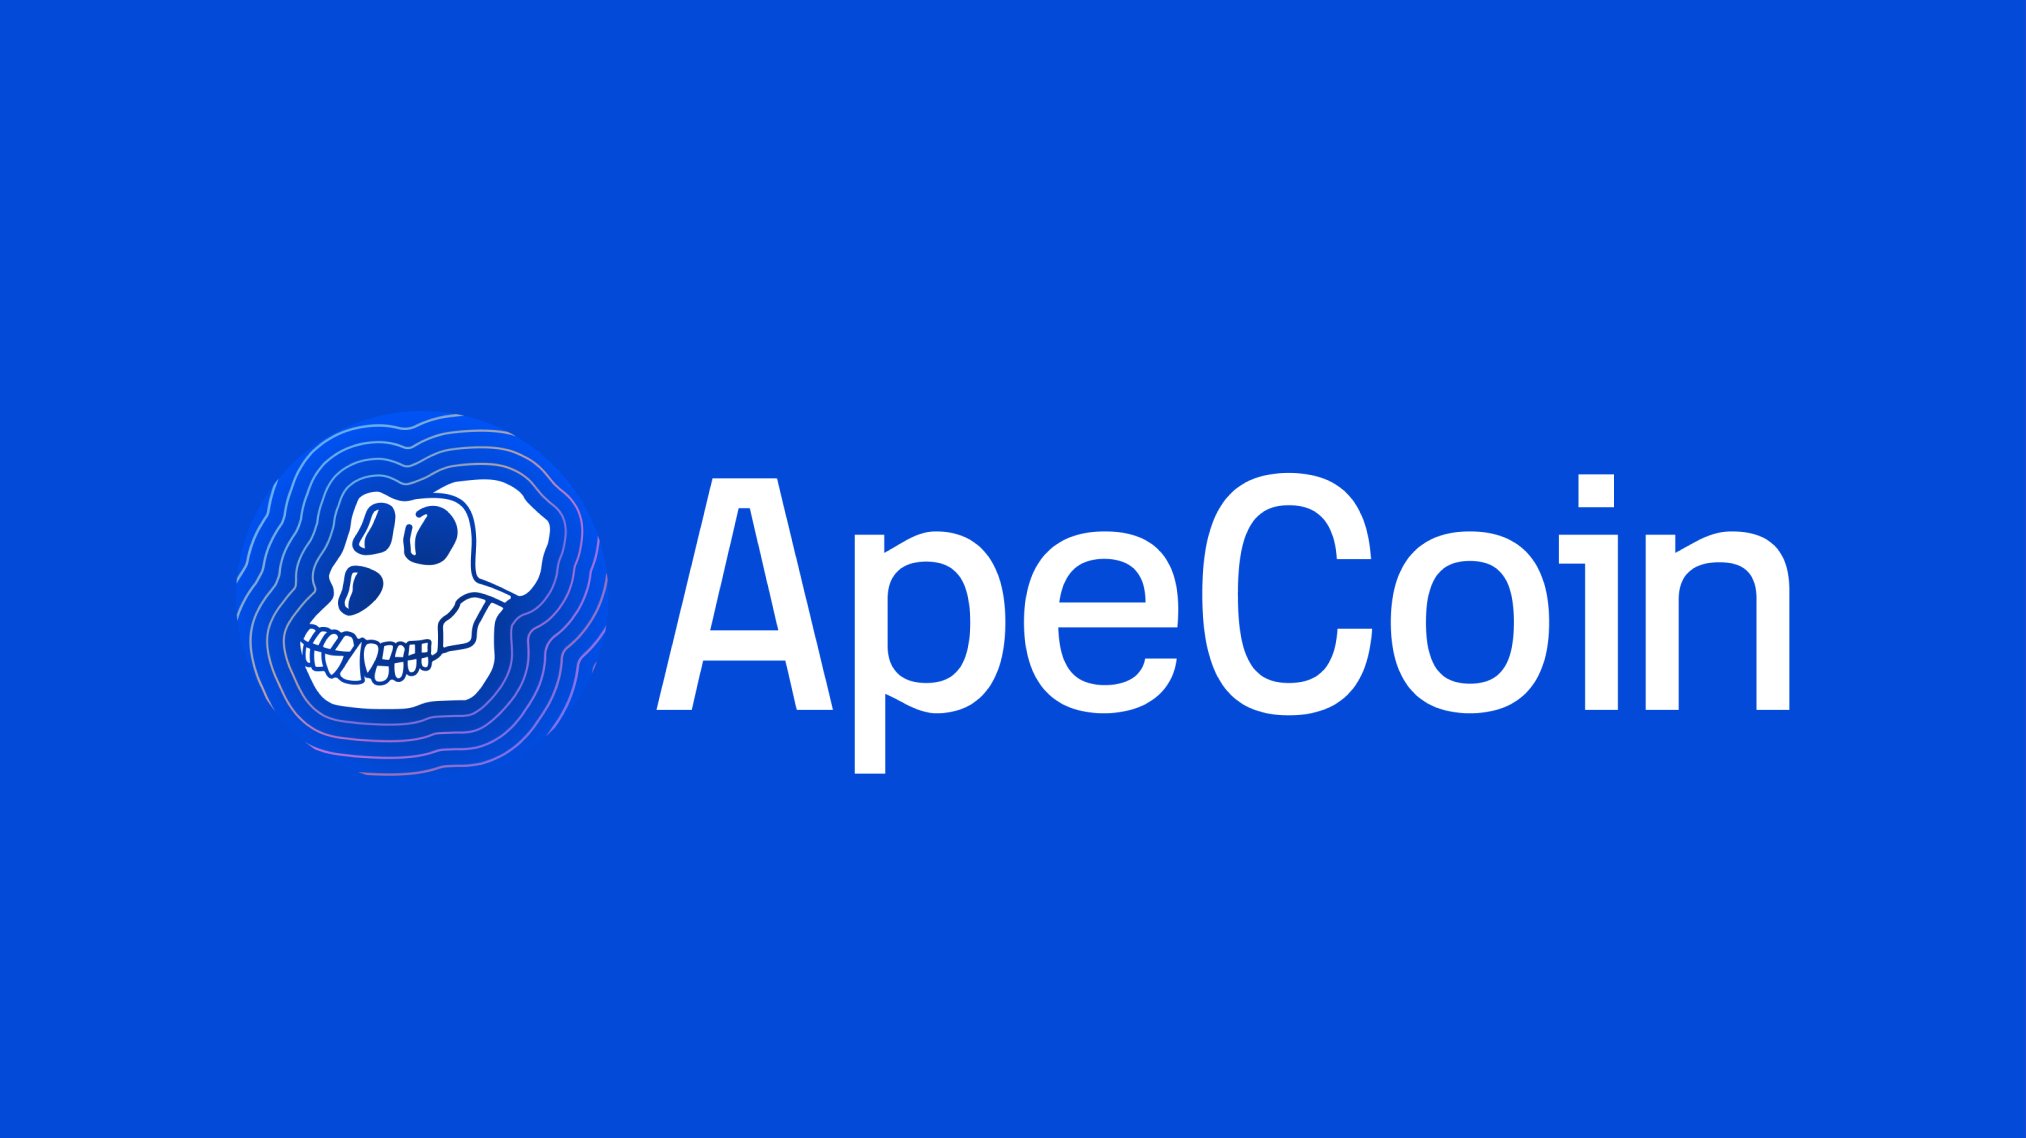 ApeCoin growth slowing down, could this be the end? Best places to buy ApeCoin